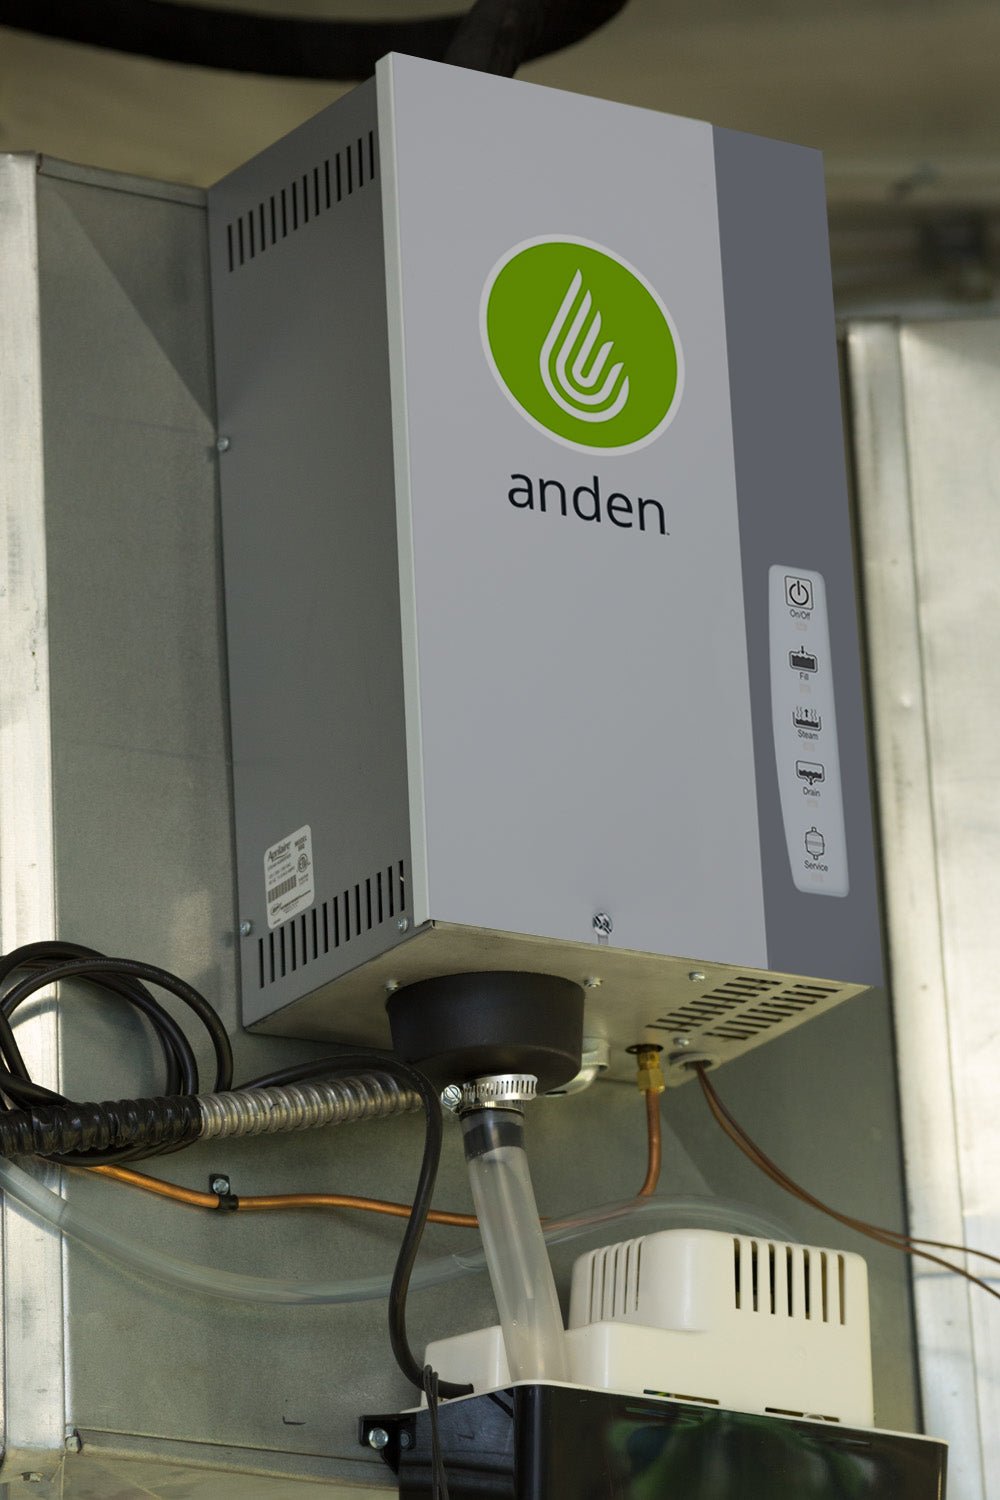 Anden Steam Humidifier 277 Pints/Day - Green Thumb Depot